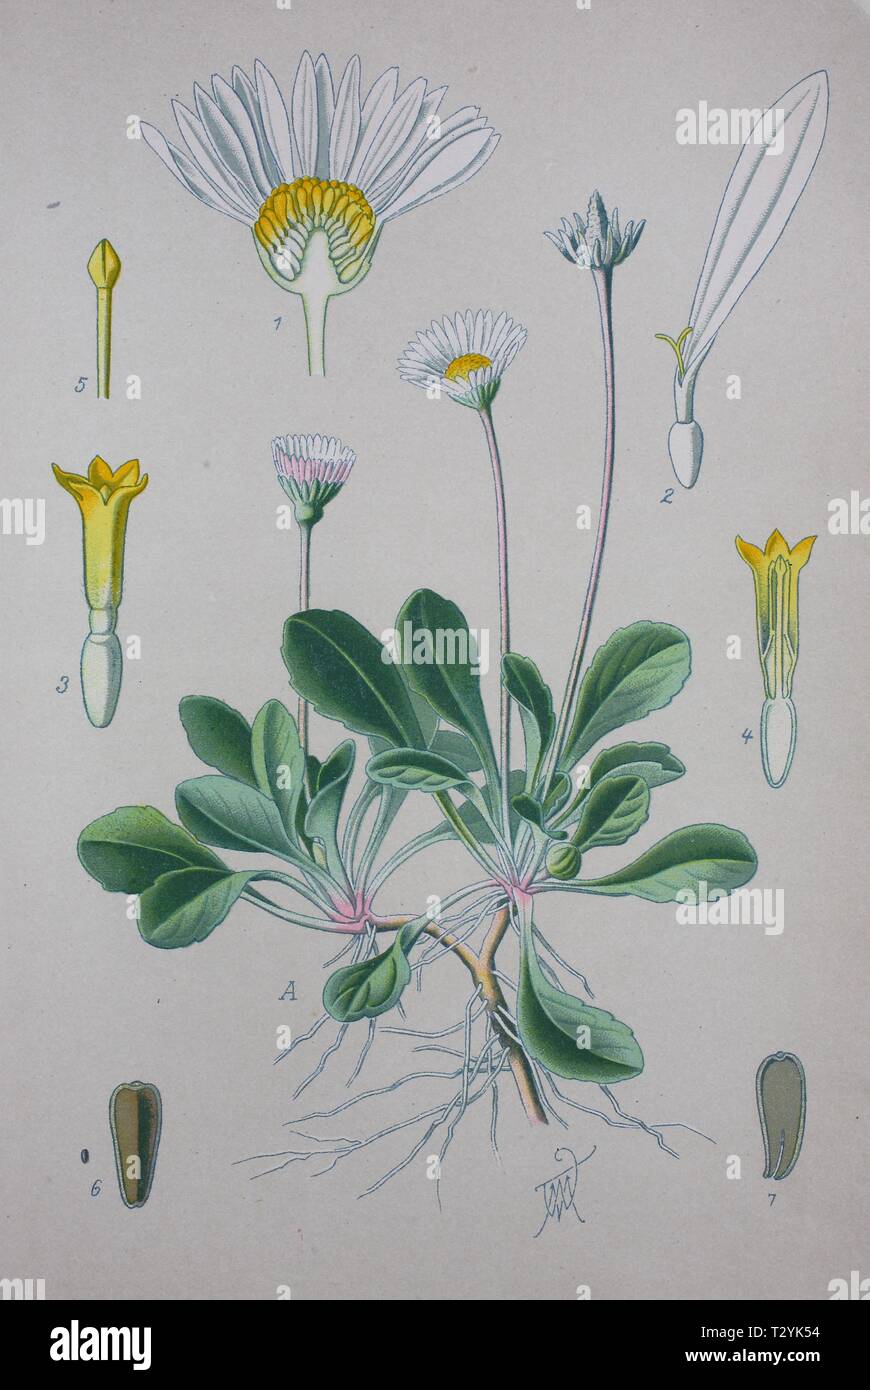 Common daisy (Bellis perennis), historical illustration from 1885, Germany Stock Photo